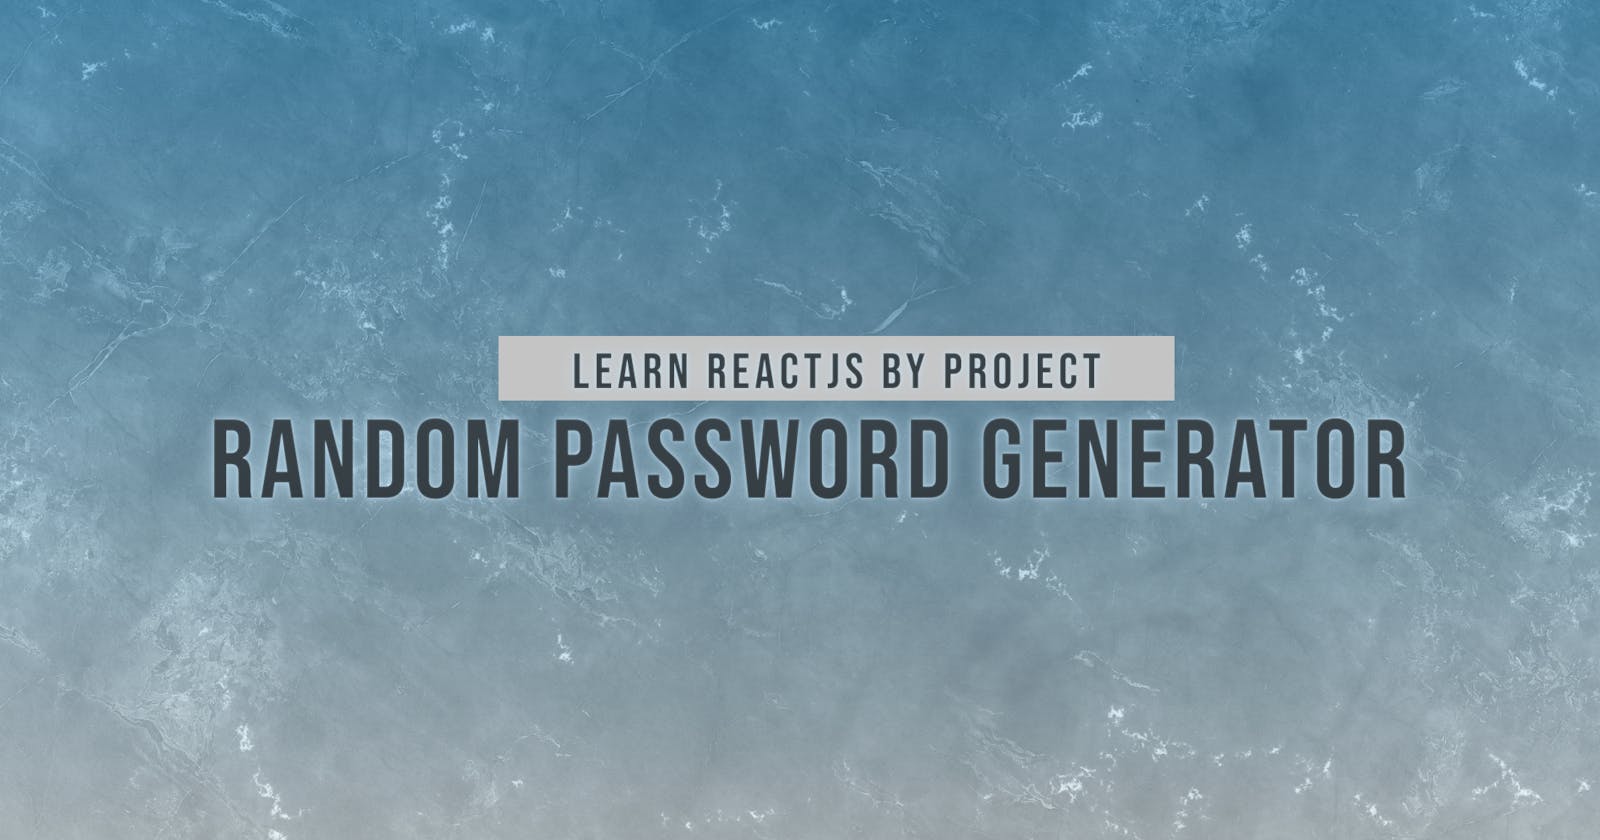 Random Password Generator – Learn Modern React JS By Projects For FREE In 2022